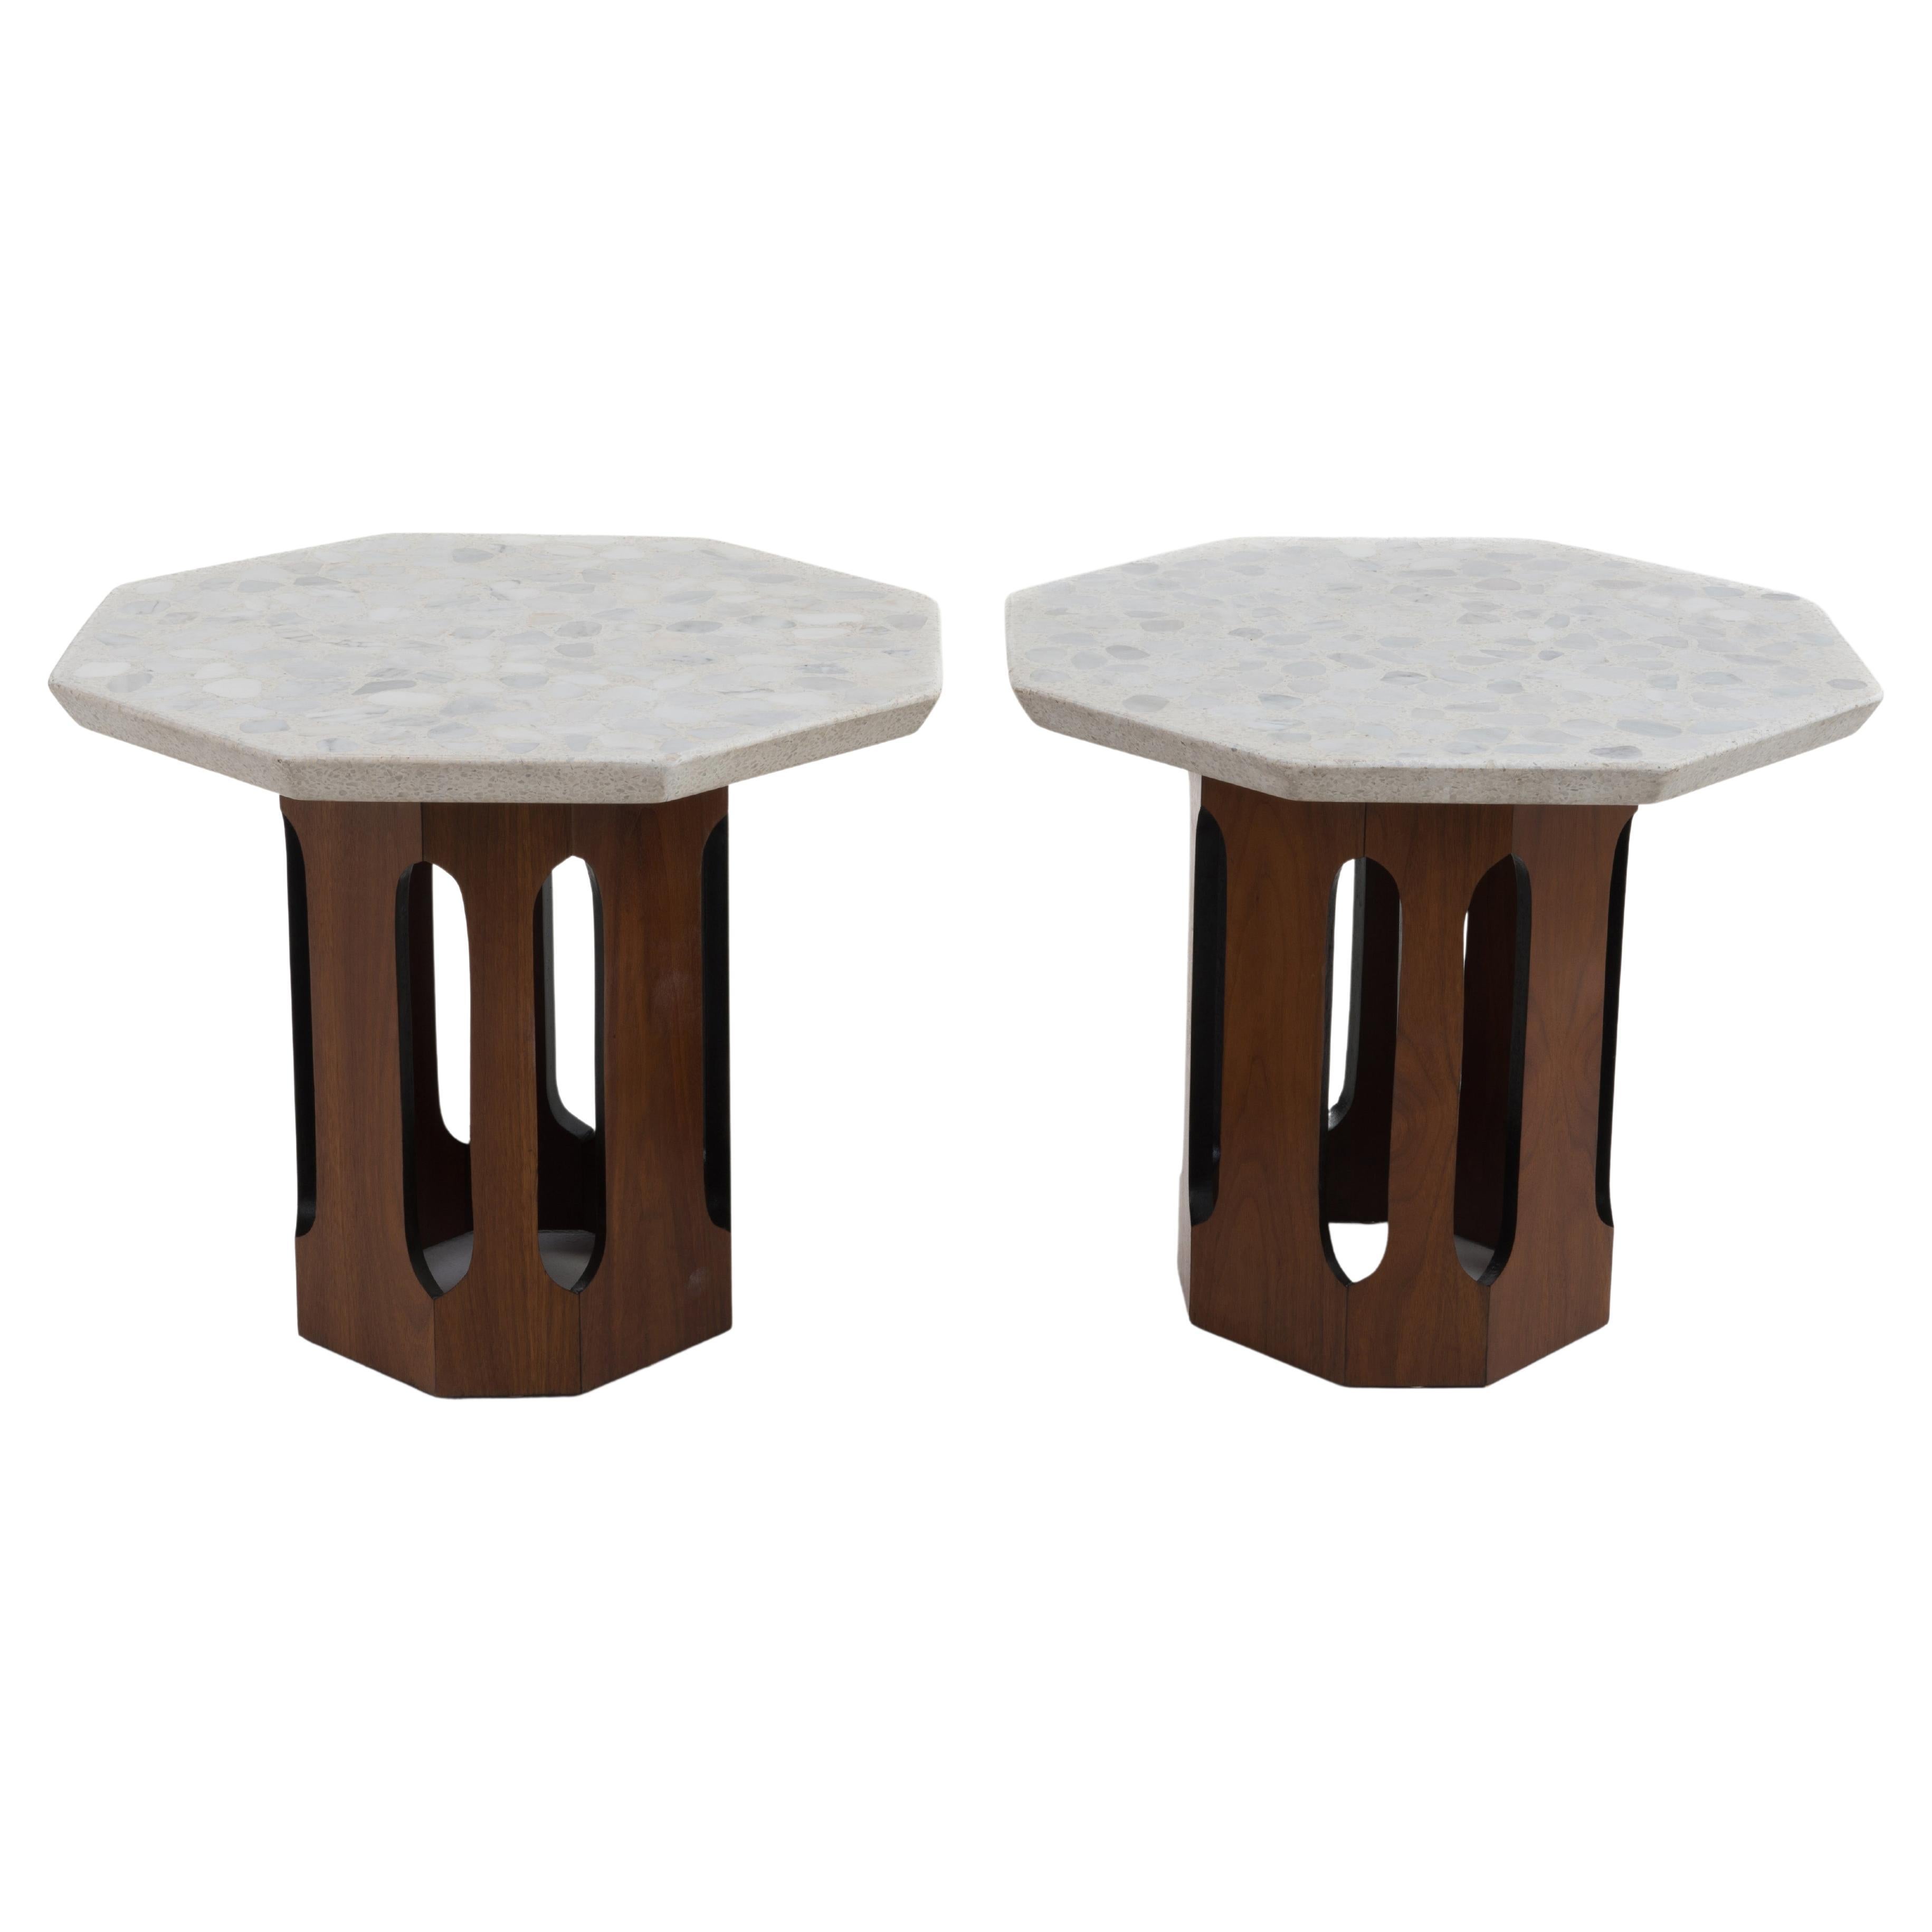 Harvey Probber Terrazzo Travertine Stone Walnut Side Tables Octagon - A Pair For Sale